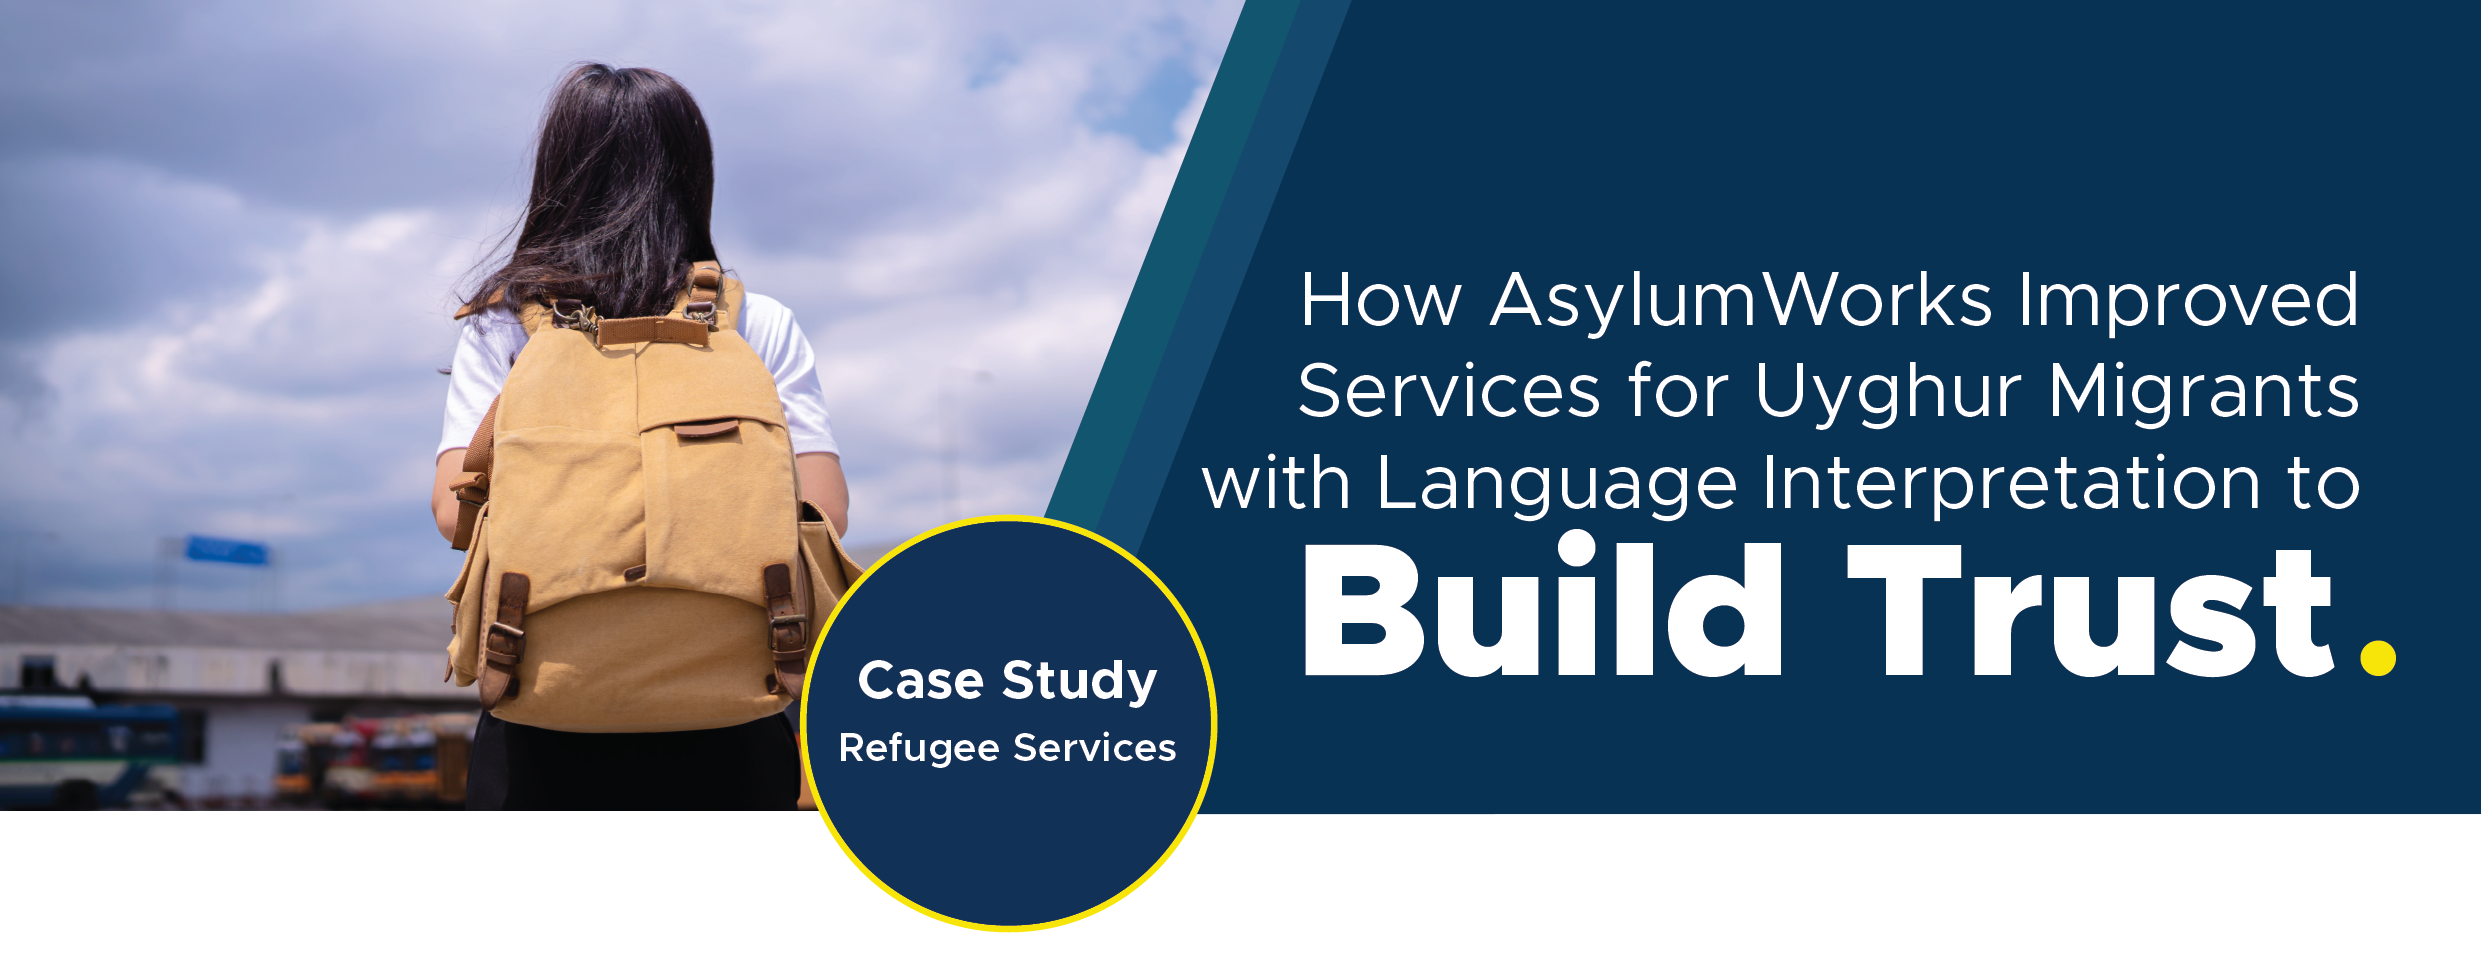 How AsylumWorks Improved Services for Uyghur Migrants with Language Interpretation to Build Trust